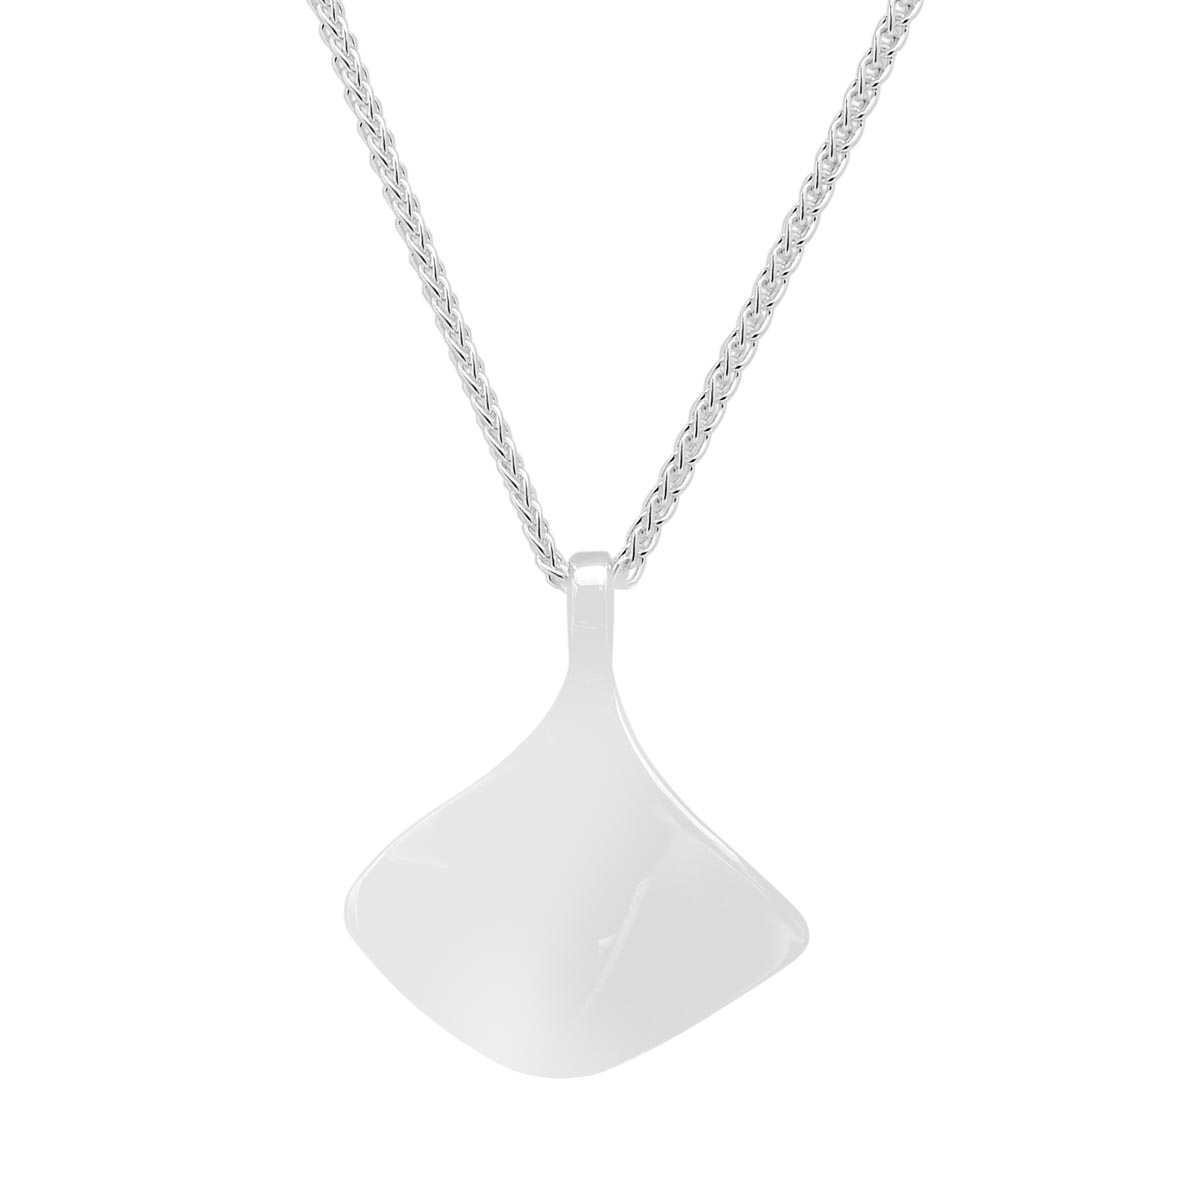 E.L. Designs Reflection Necklace in Sterling Silver